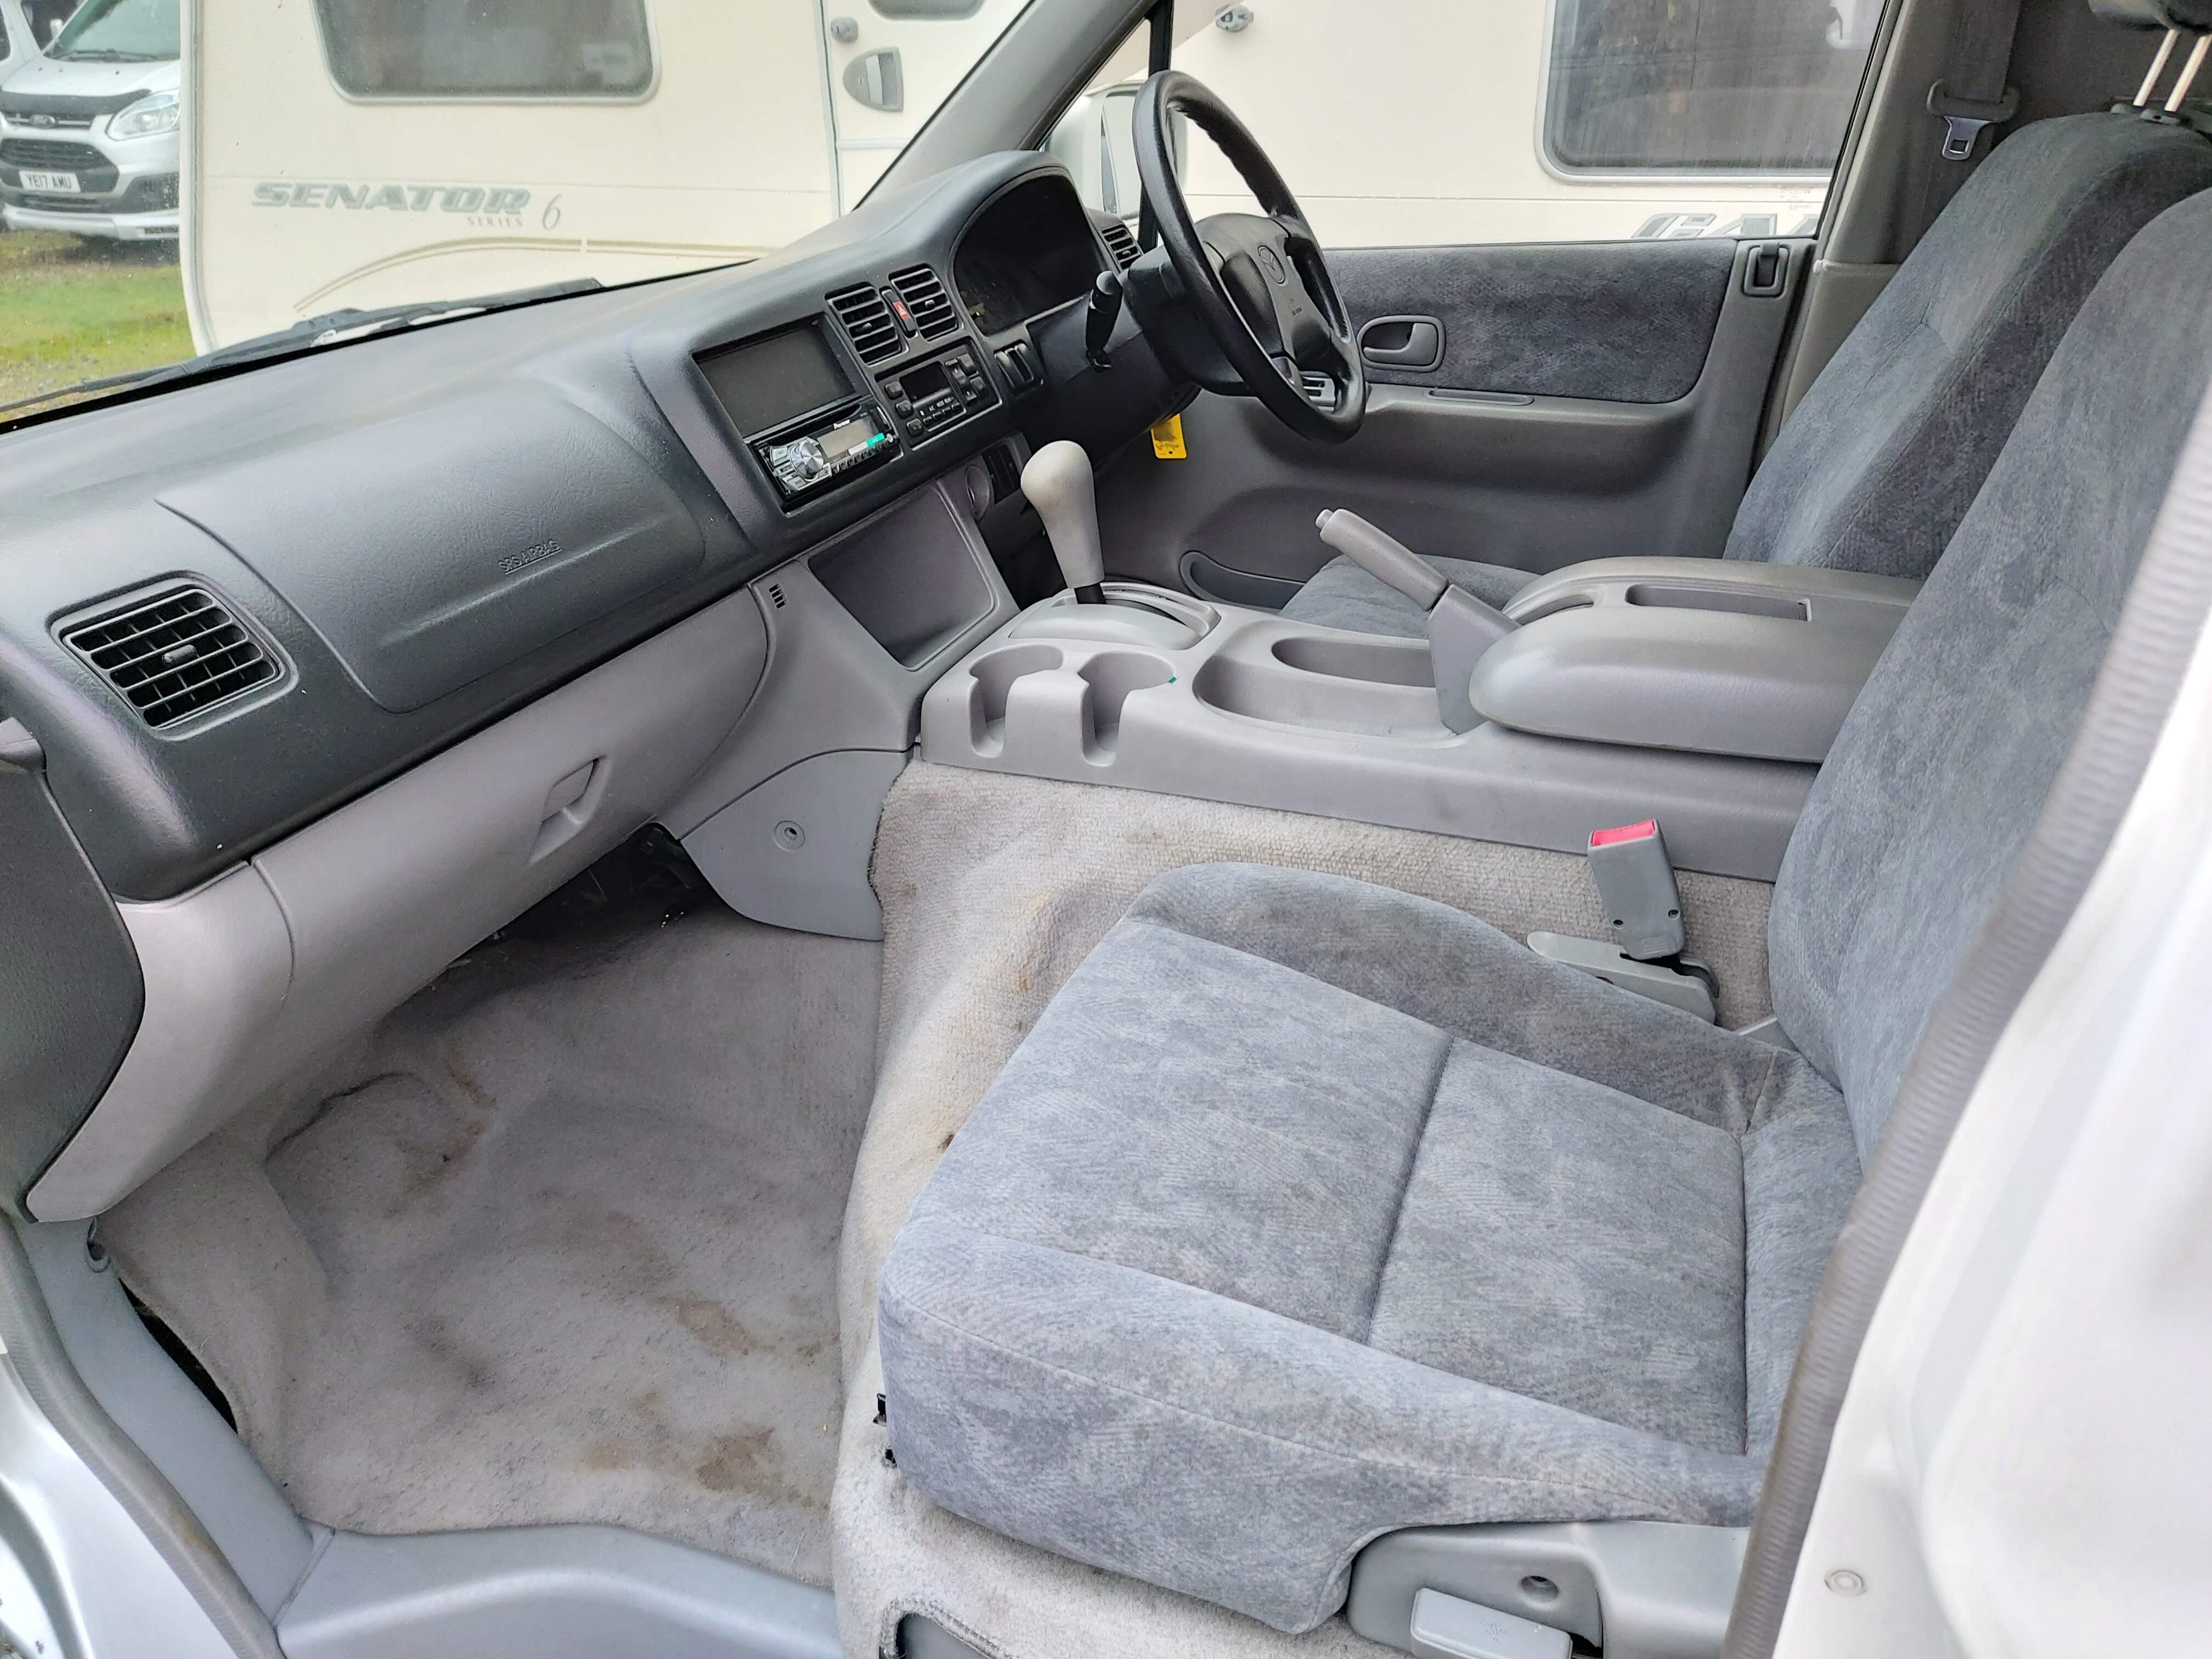 NOW SOLD 1999 Mazda Bongo Campervan with the Top of the range Lulworth Conversion